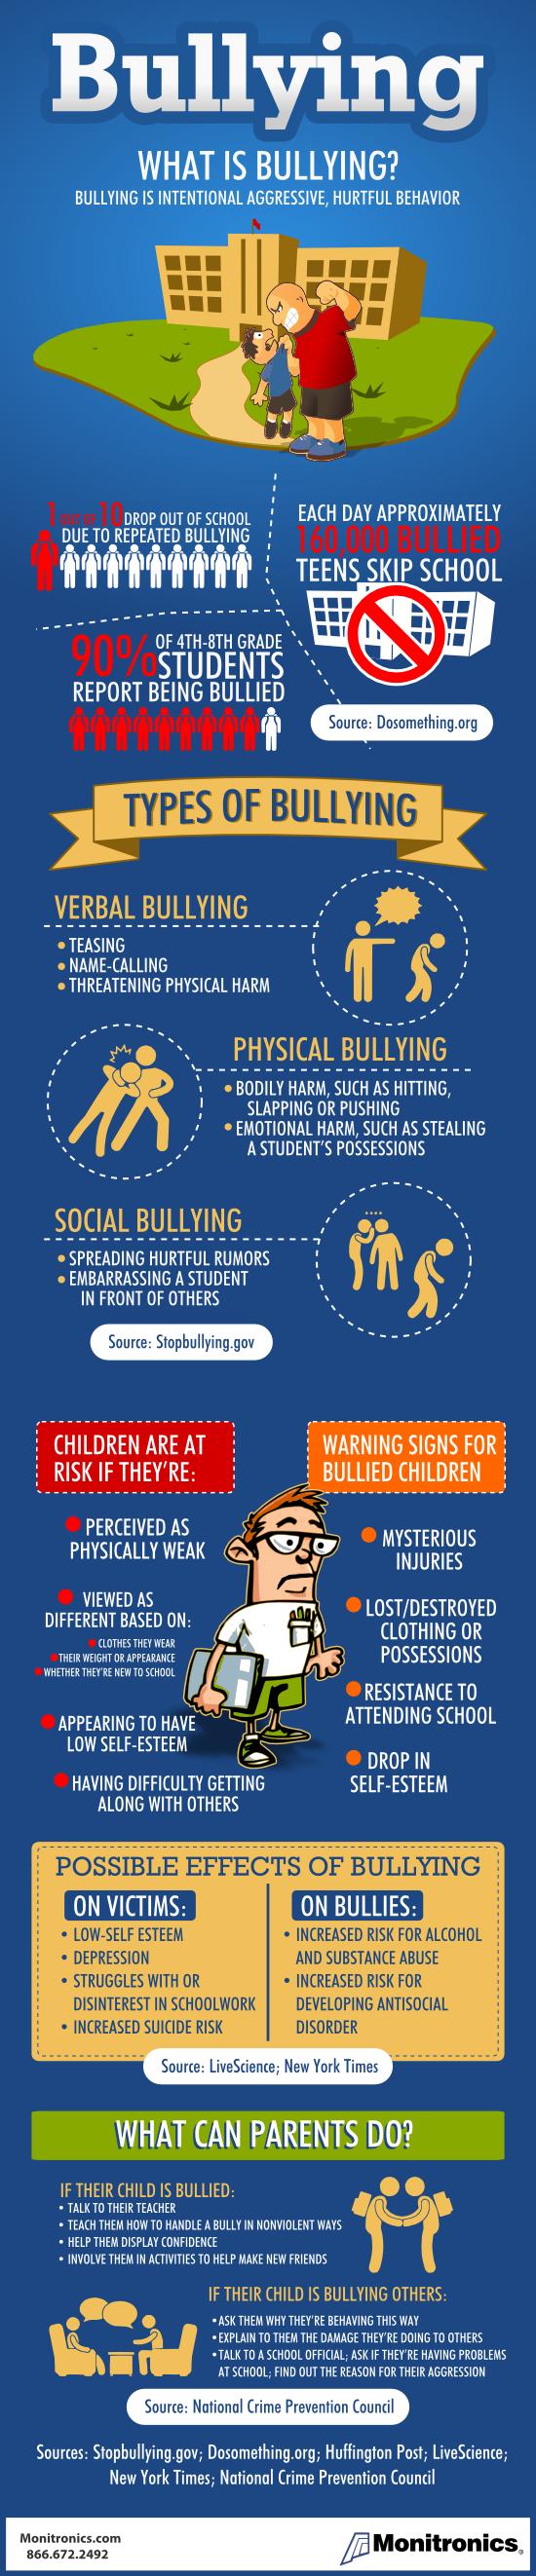 what-is-bullying--infographic_5264393892107